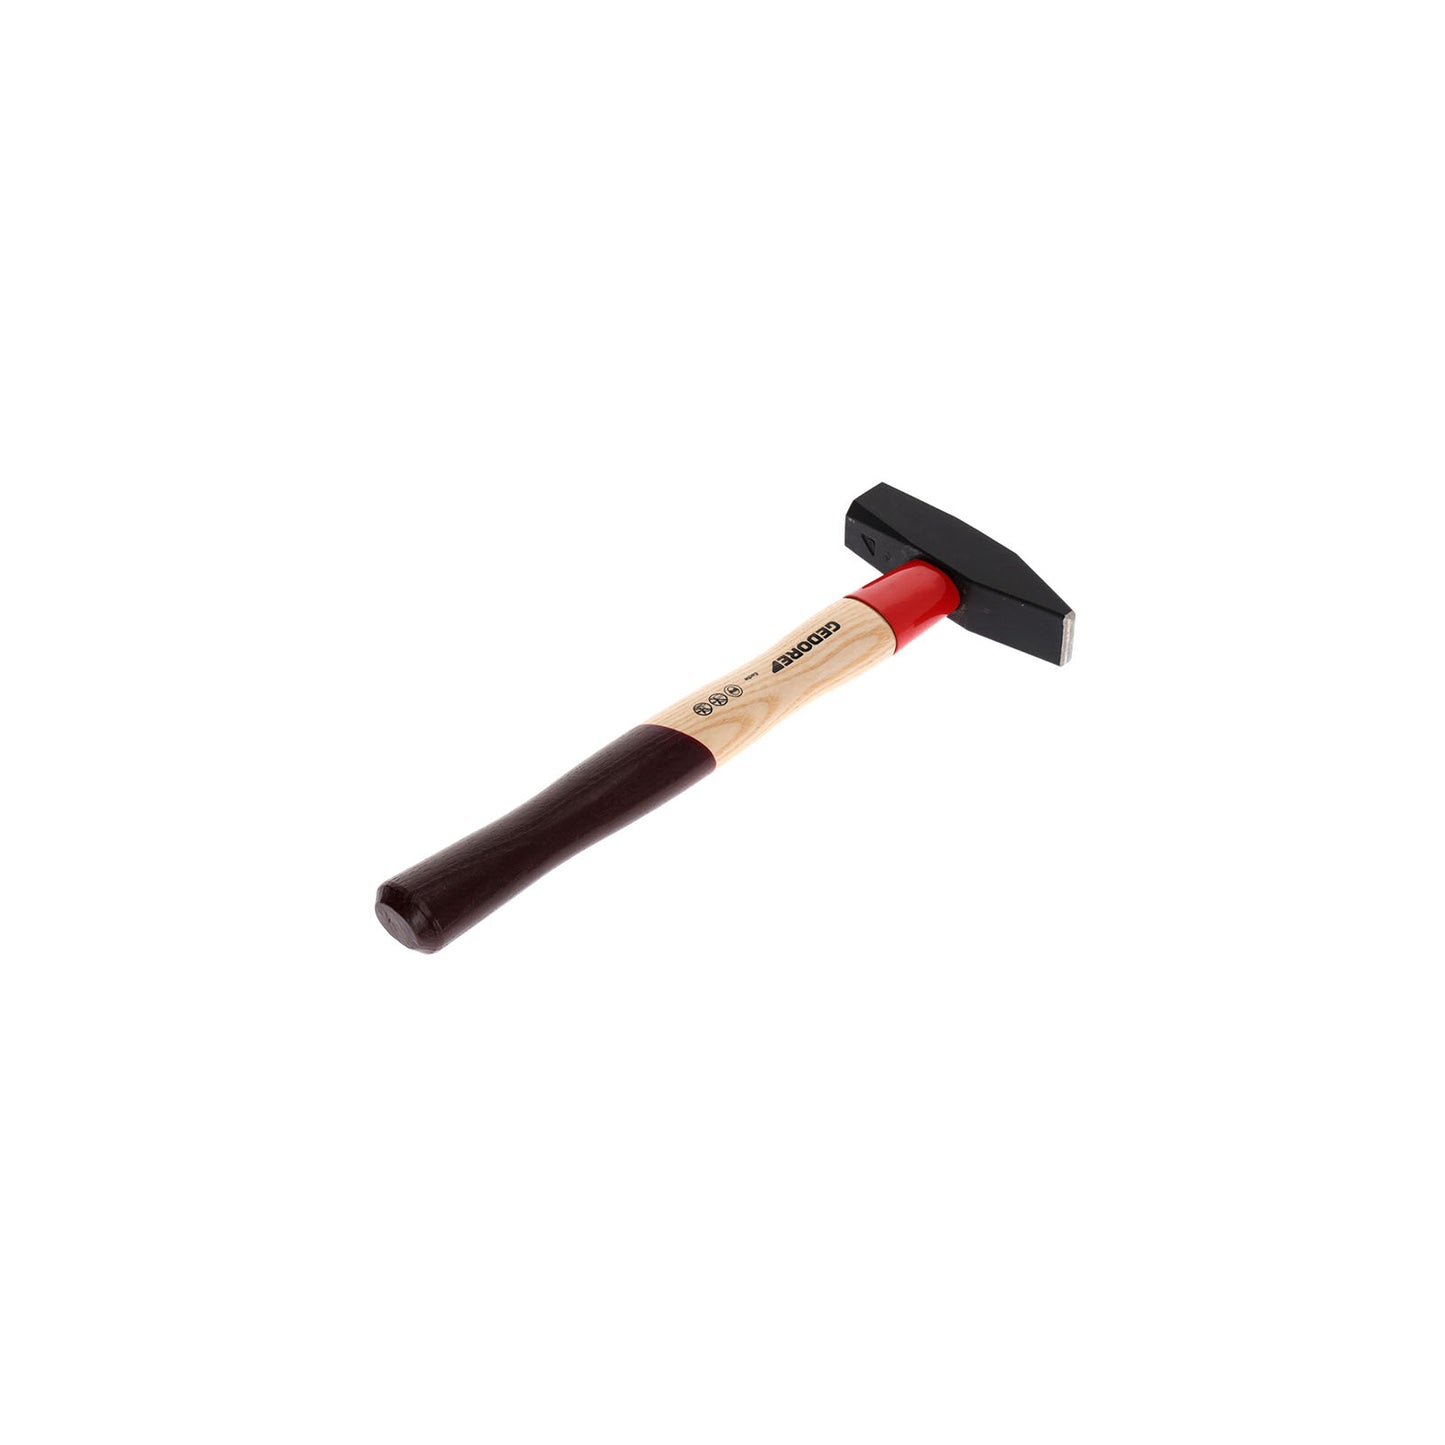 GEDORE 600 E-600 - ROTBAND assembly hammer 600g (8582340)